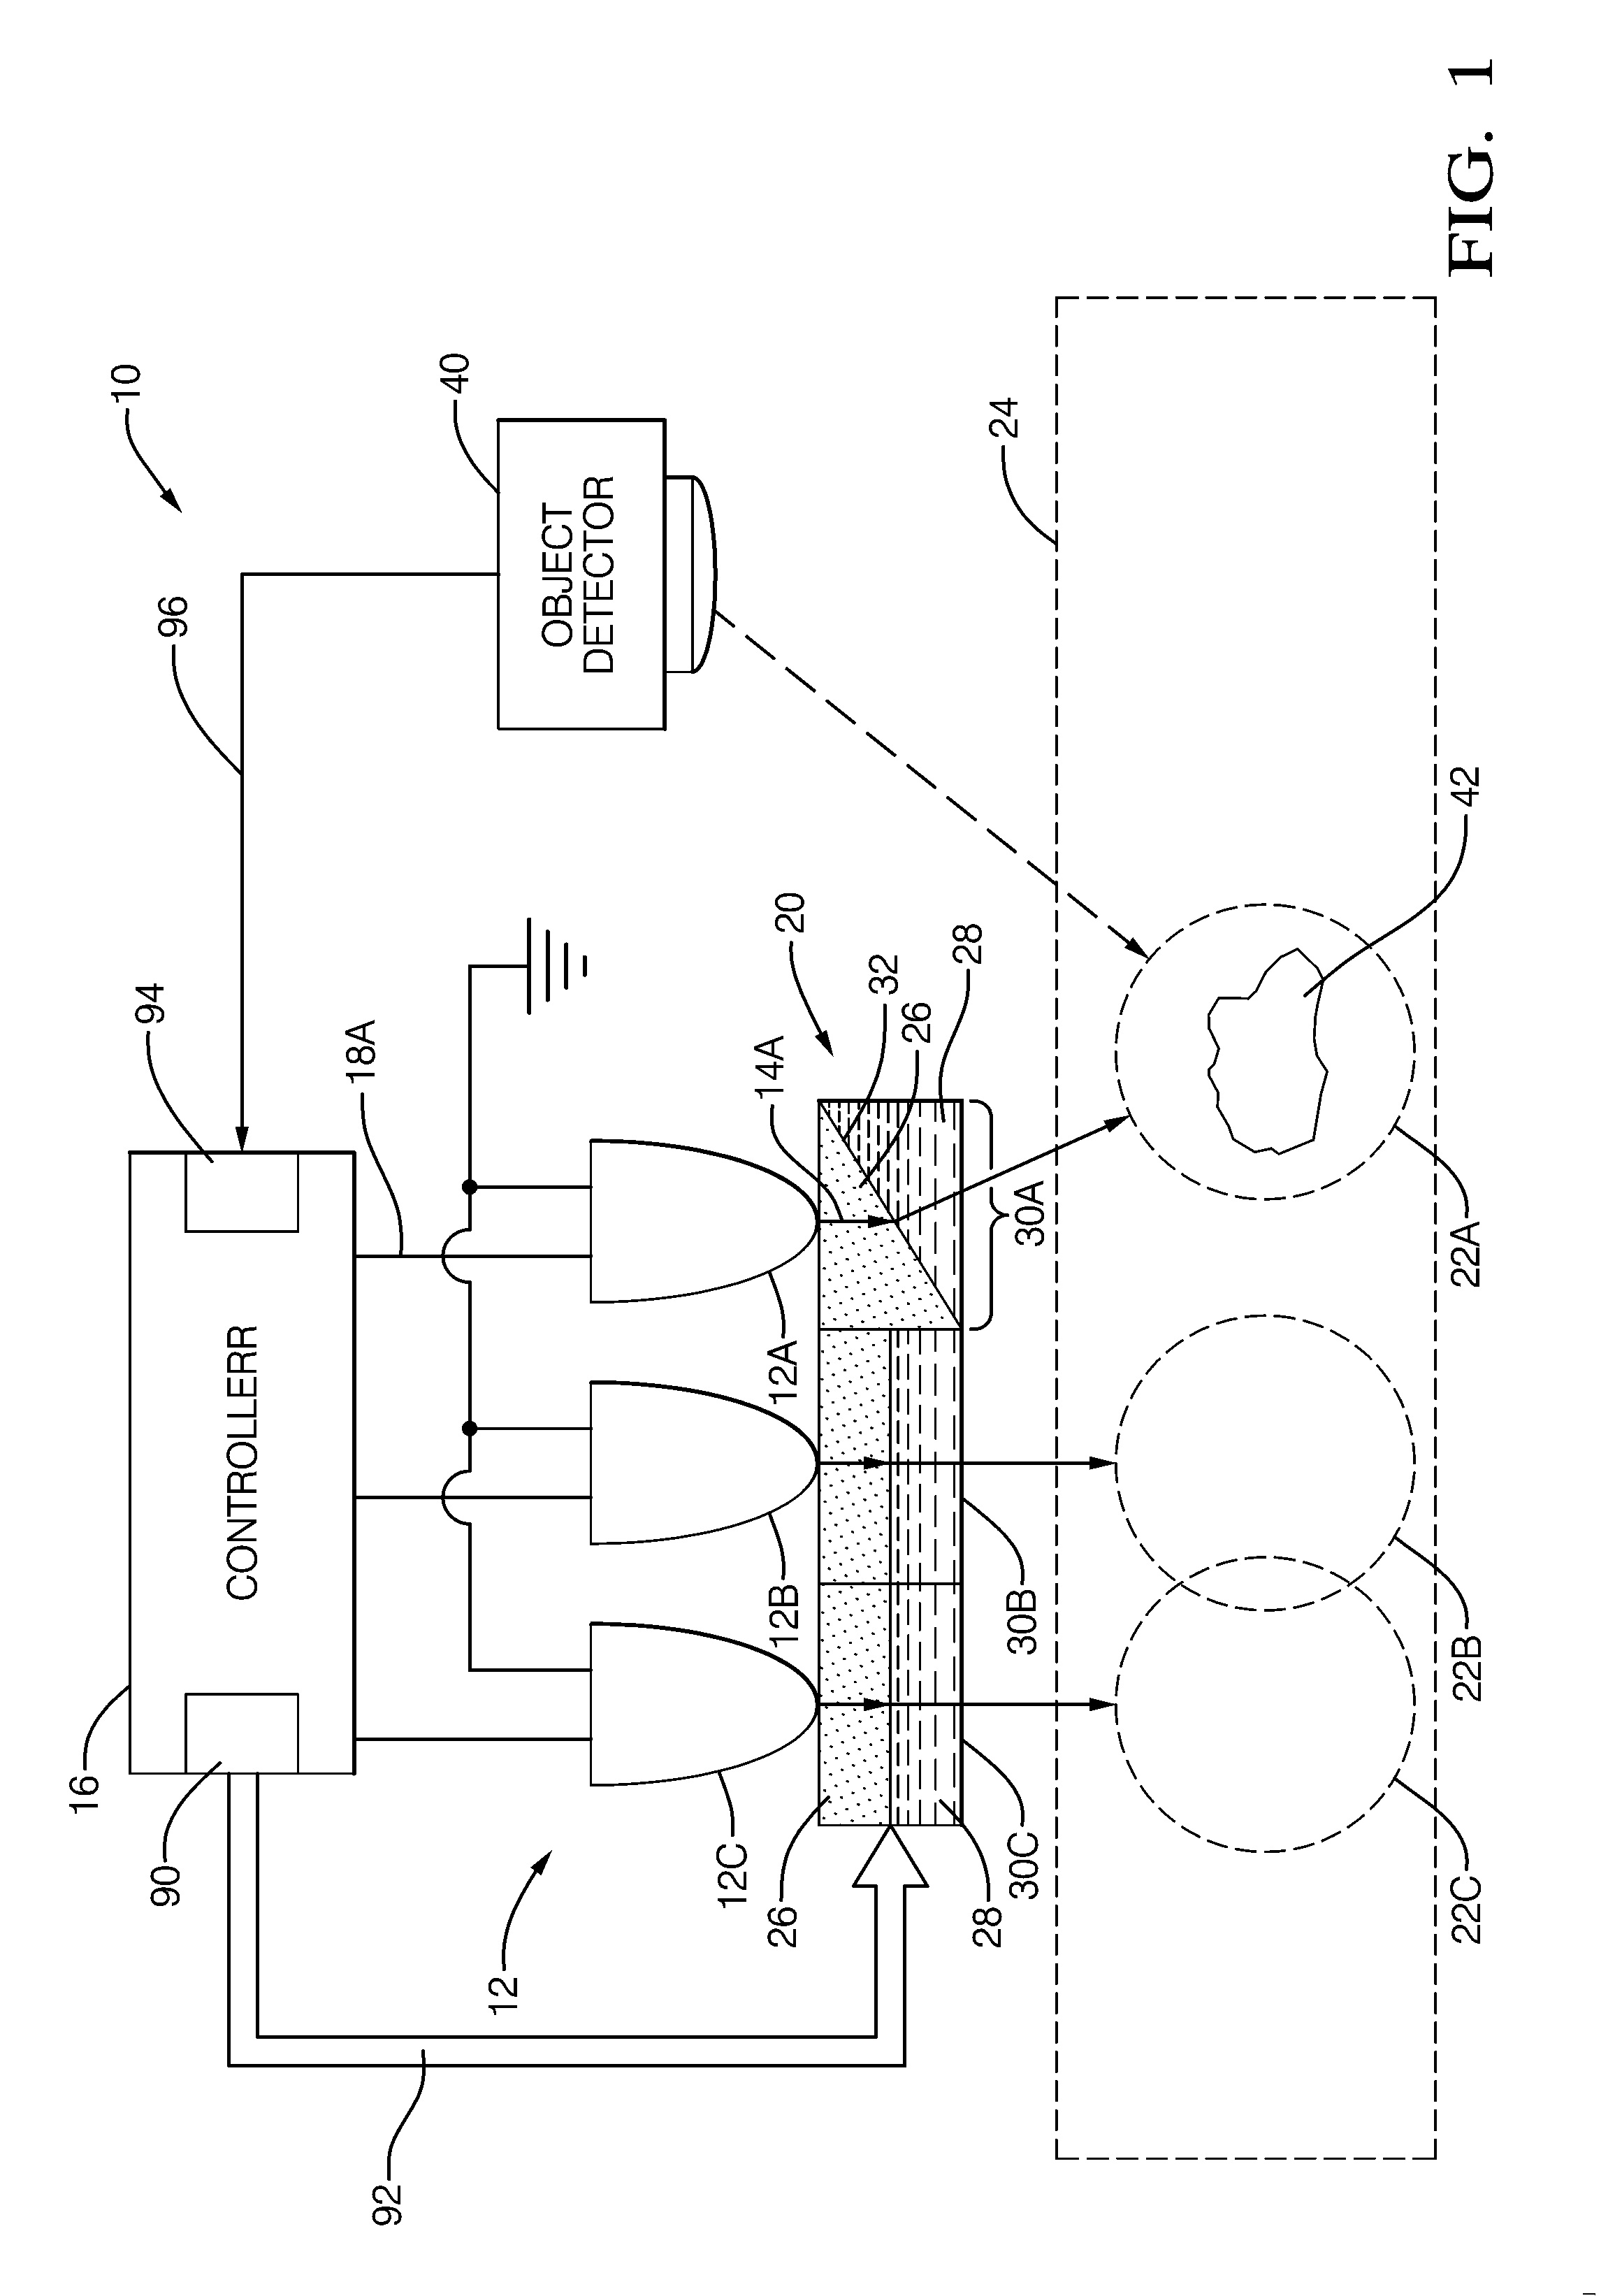 Light distribution pattern control using object detection and electrowetting lenses